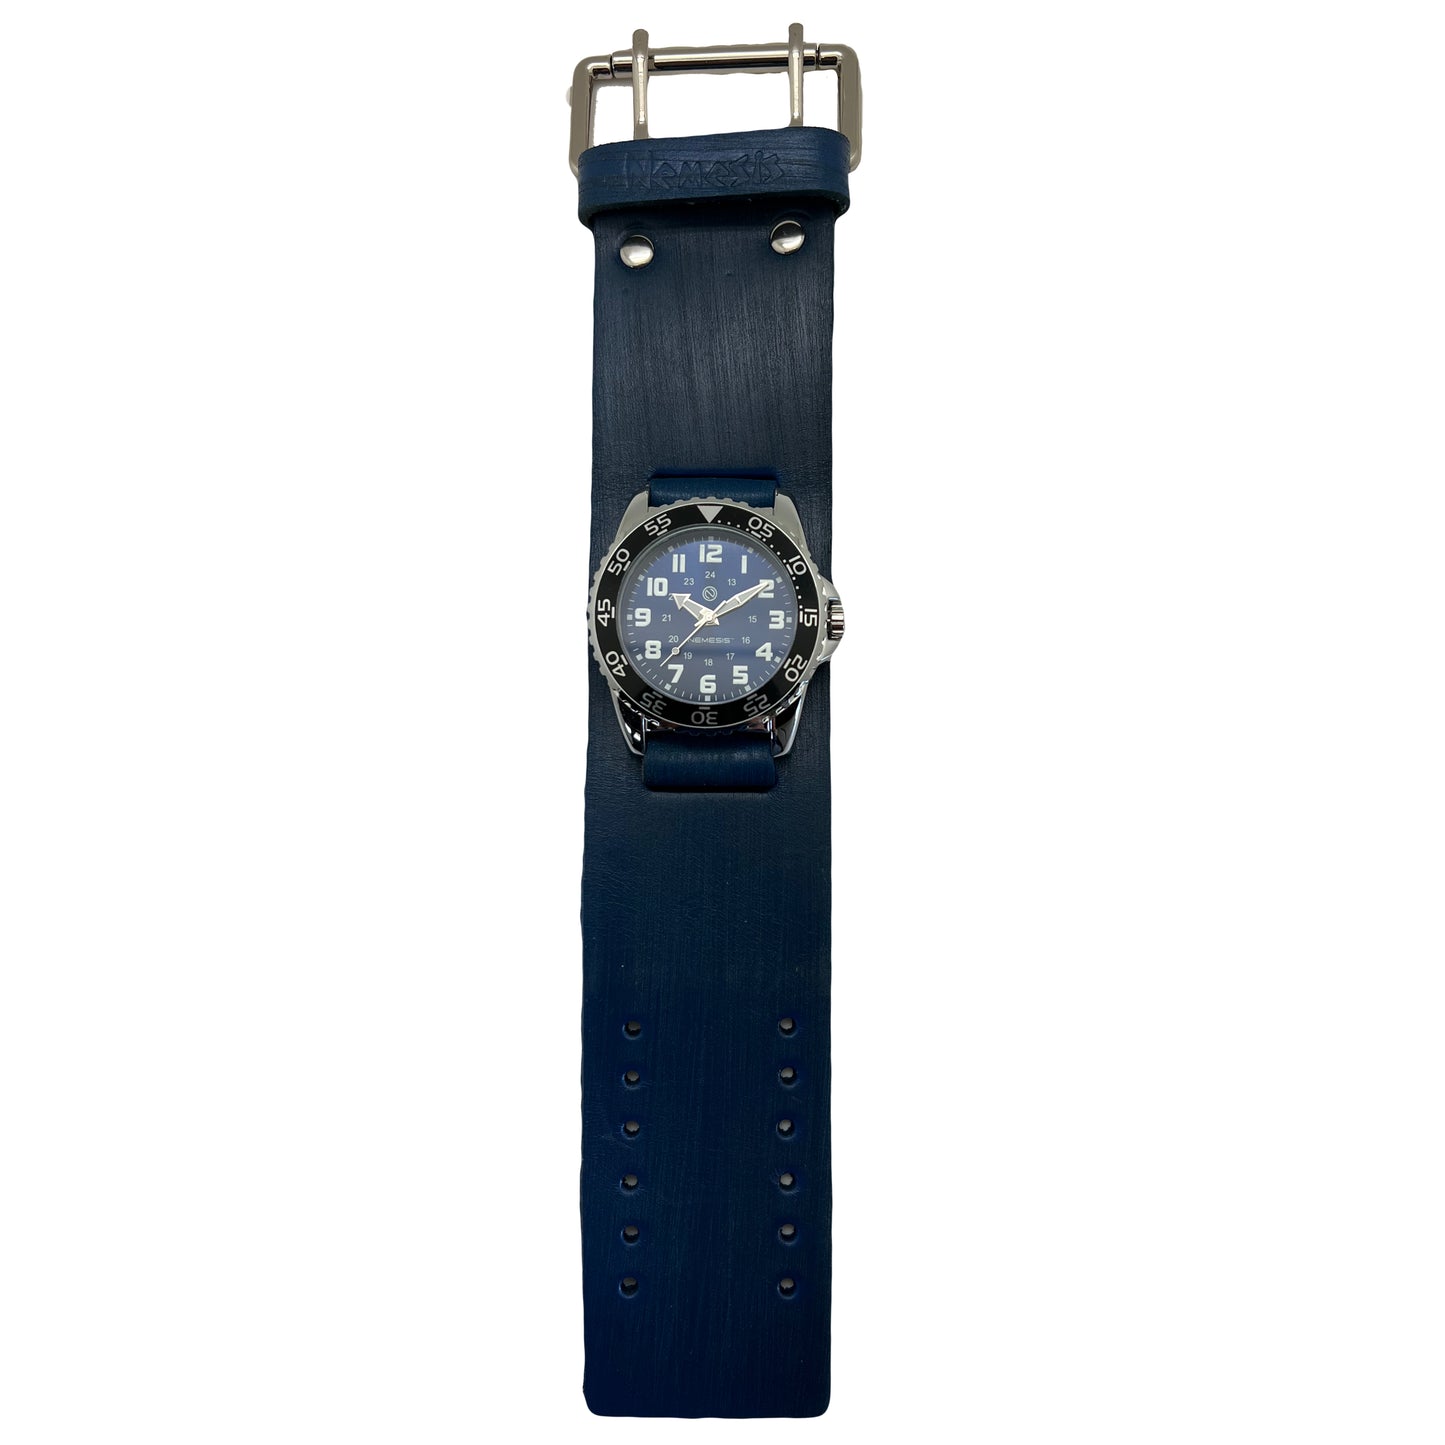 Hybrid Diver Blue/White Watch with Distressed Blue Leather Wide Cuff